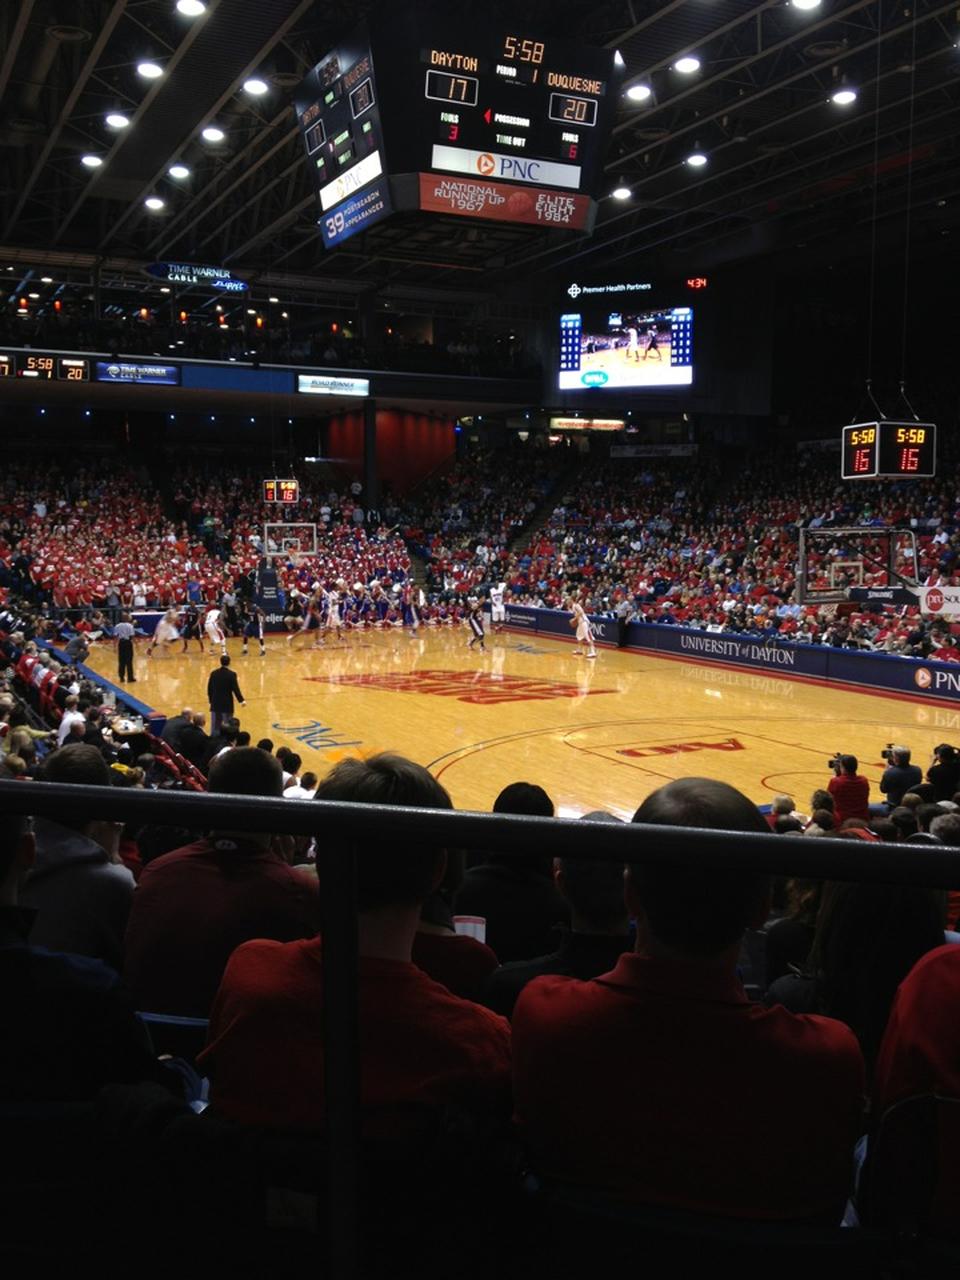 section 203, row a seat view  - university of dayton arena